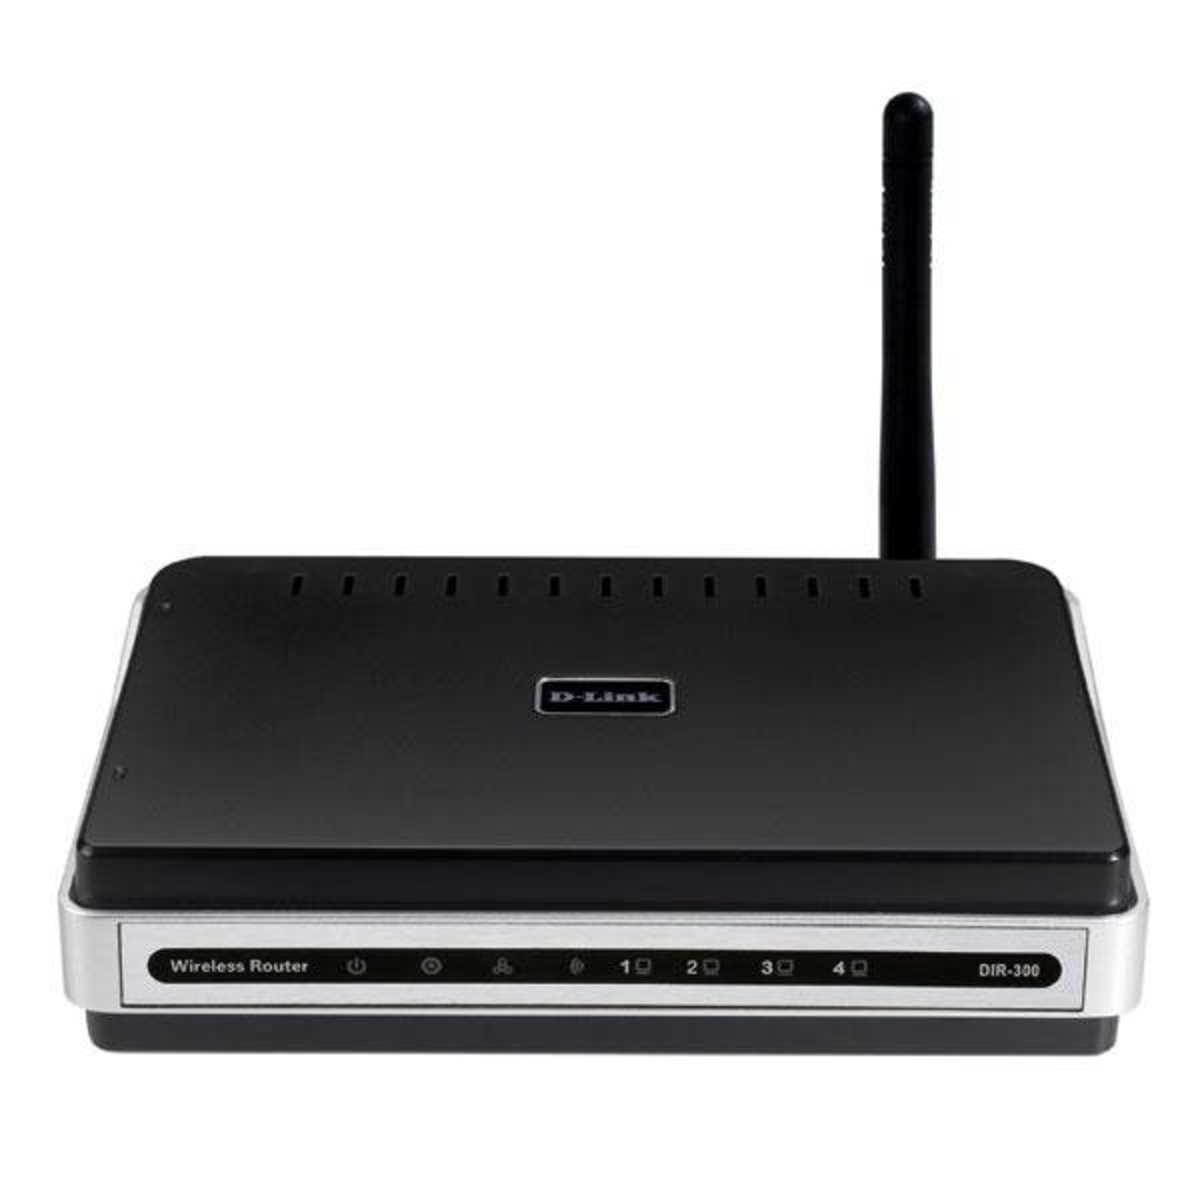 How to Configure a D-Link Router? Step By Step Guide with Pictures for Beginners